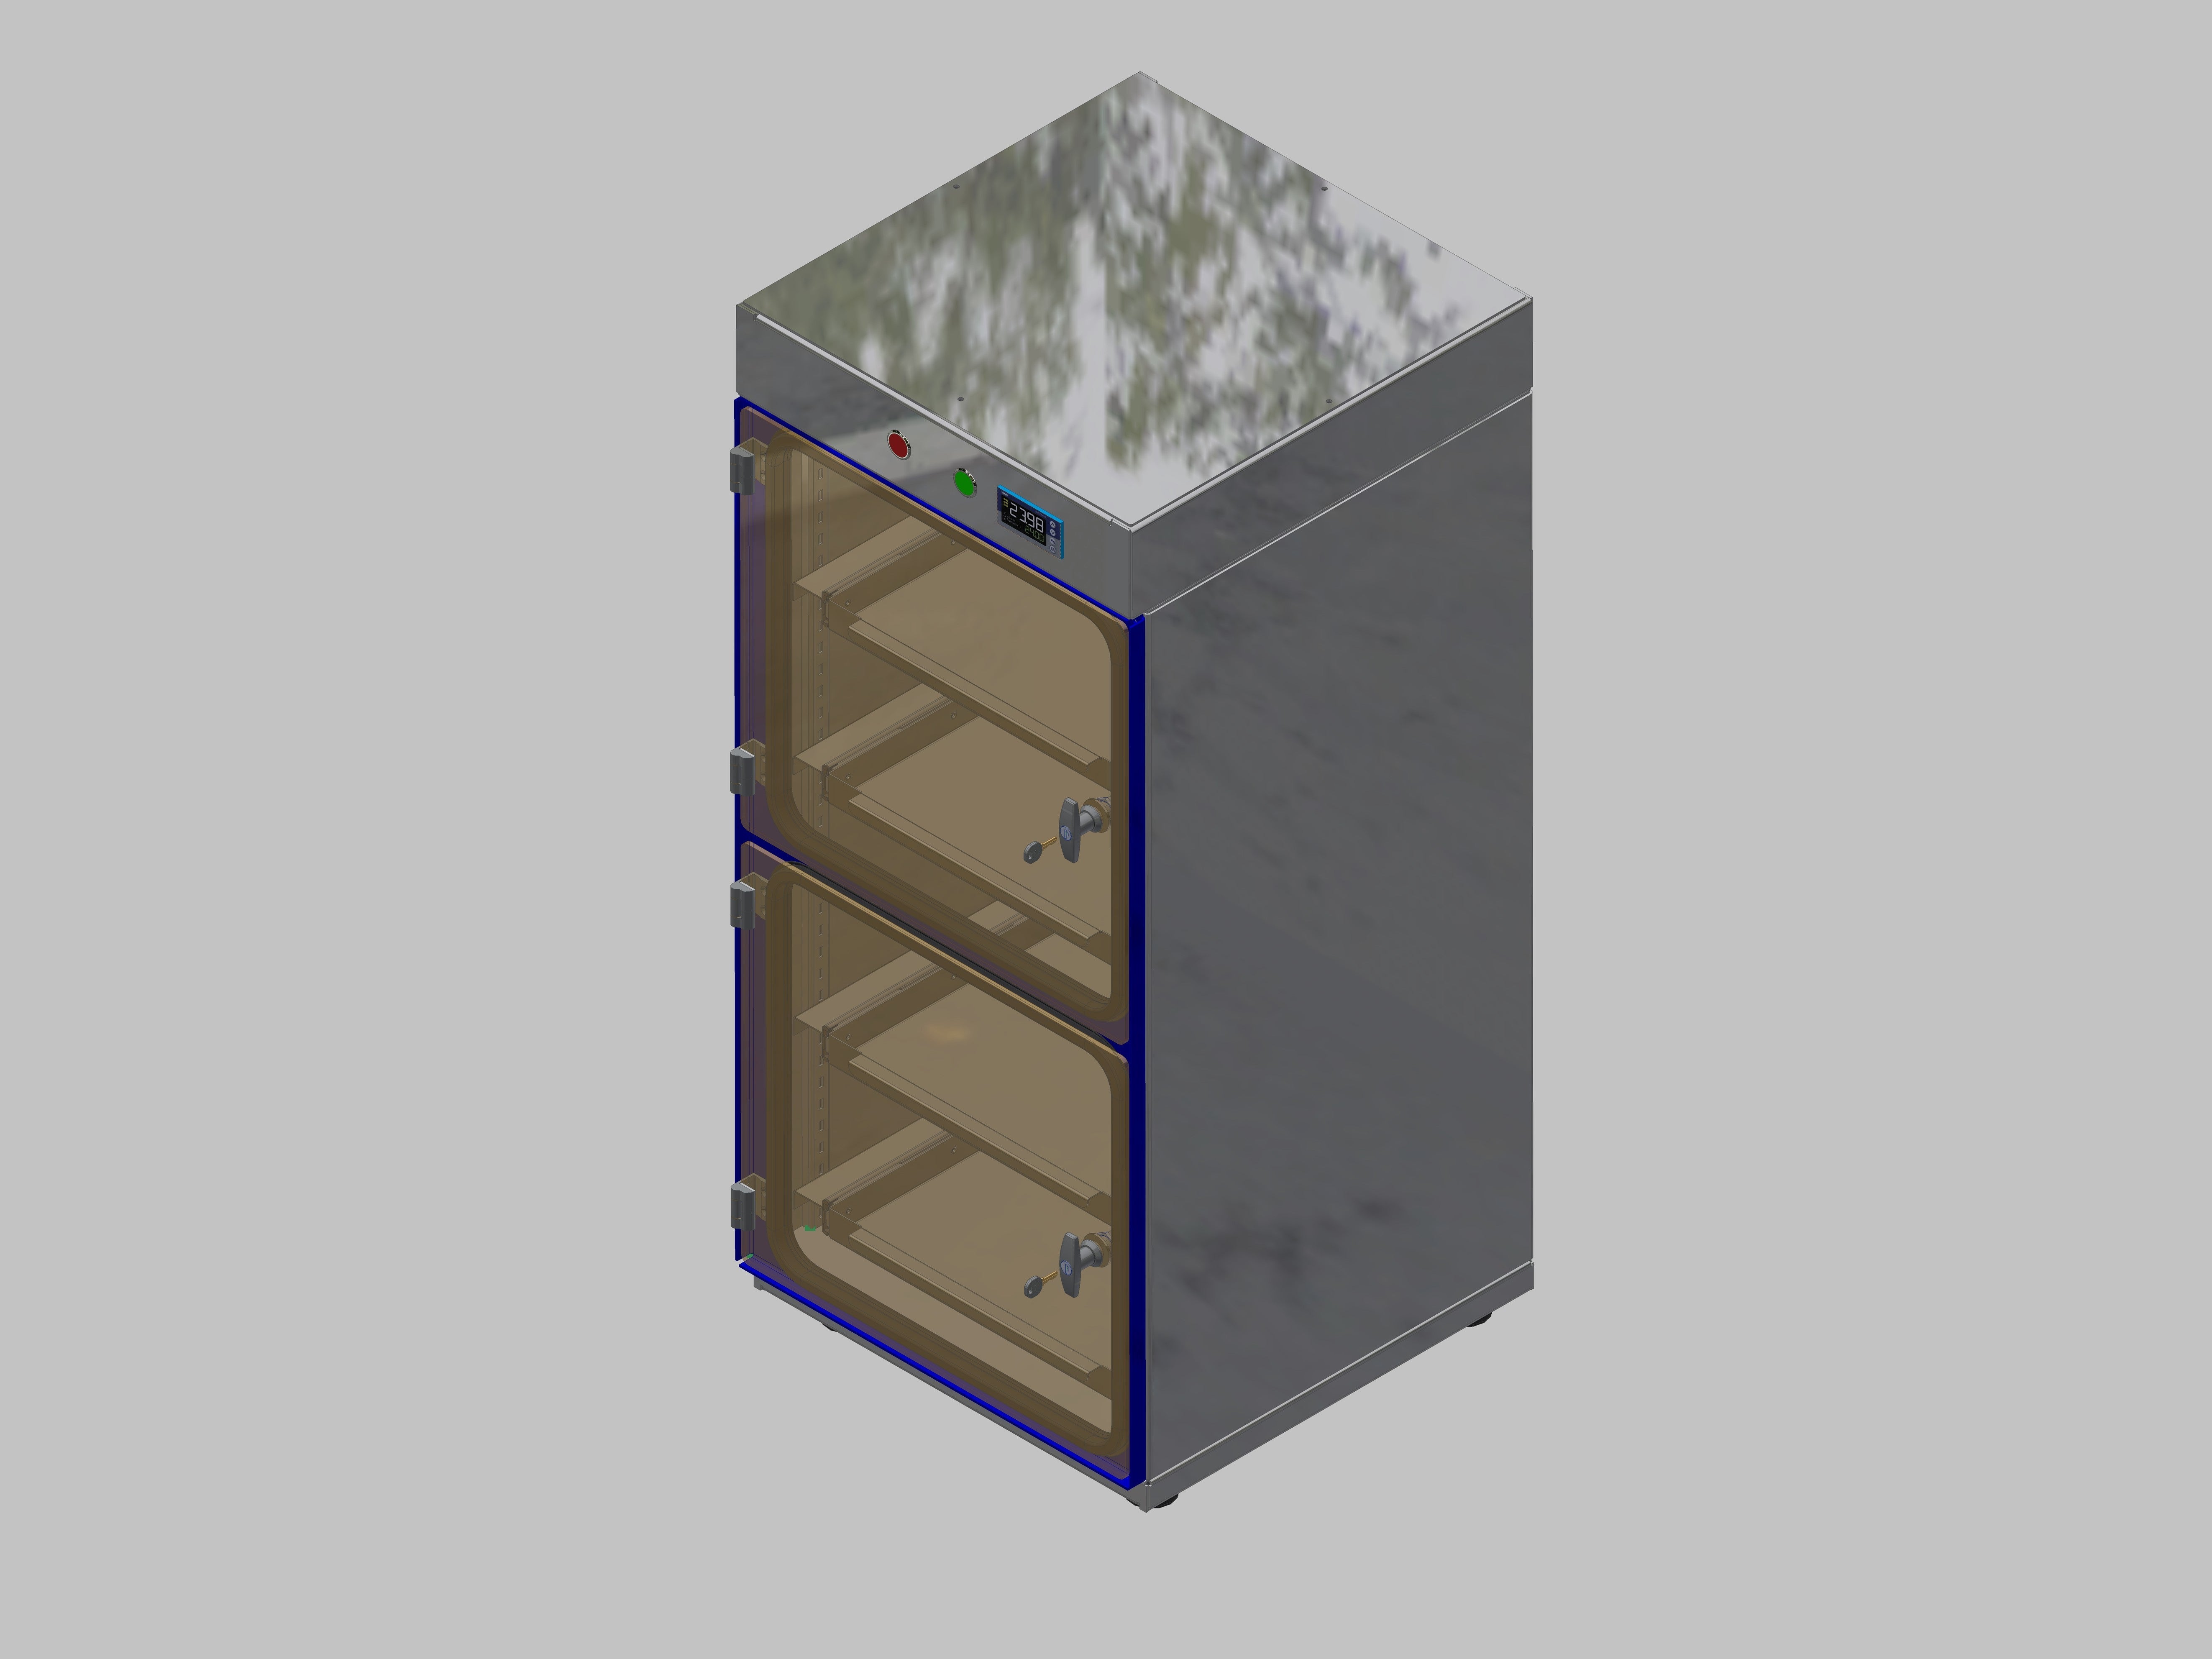 Dry storage cabinet-ITN-600-2 with 2 drawers per compartment and base design with adjustable feet